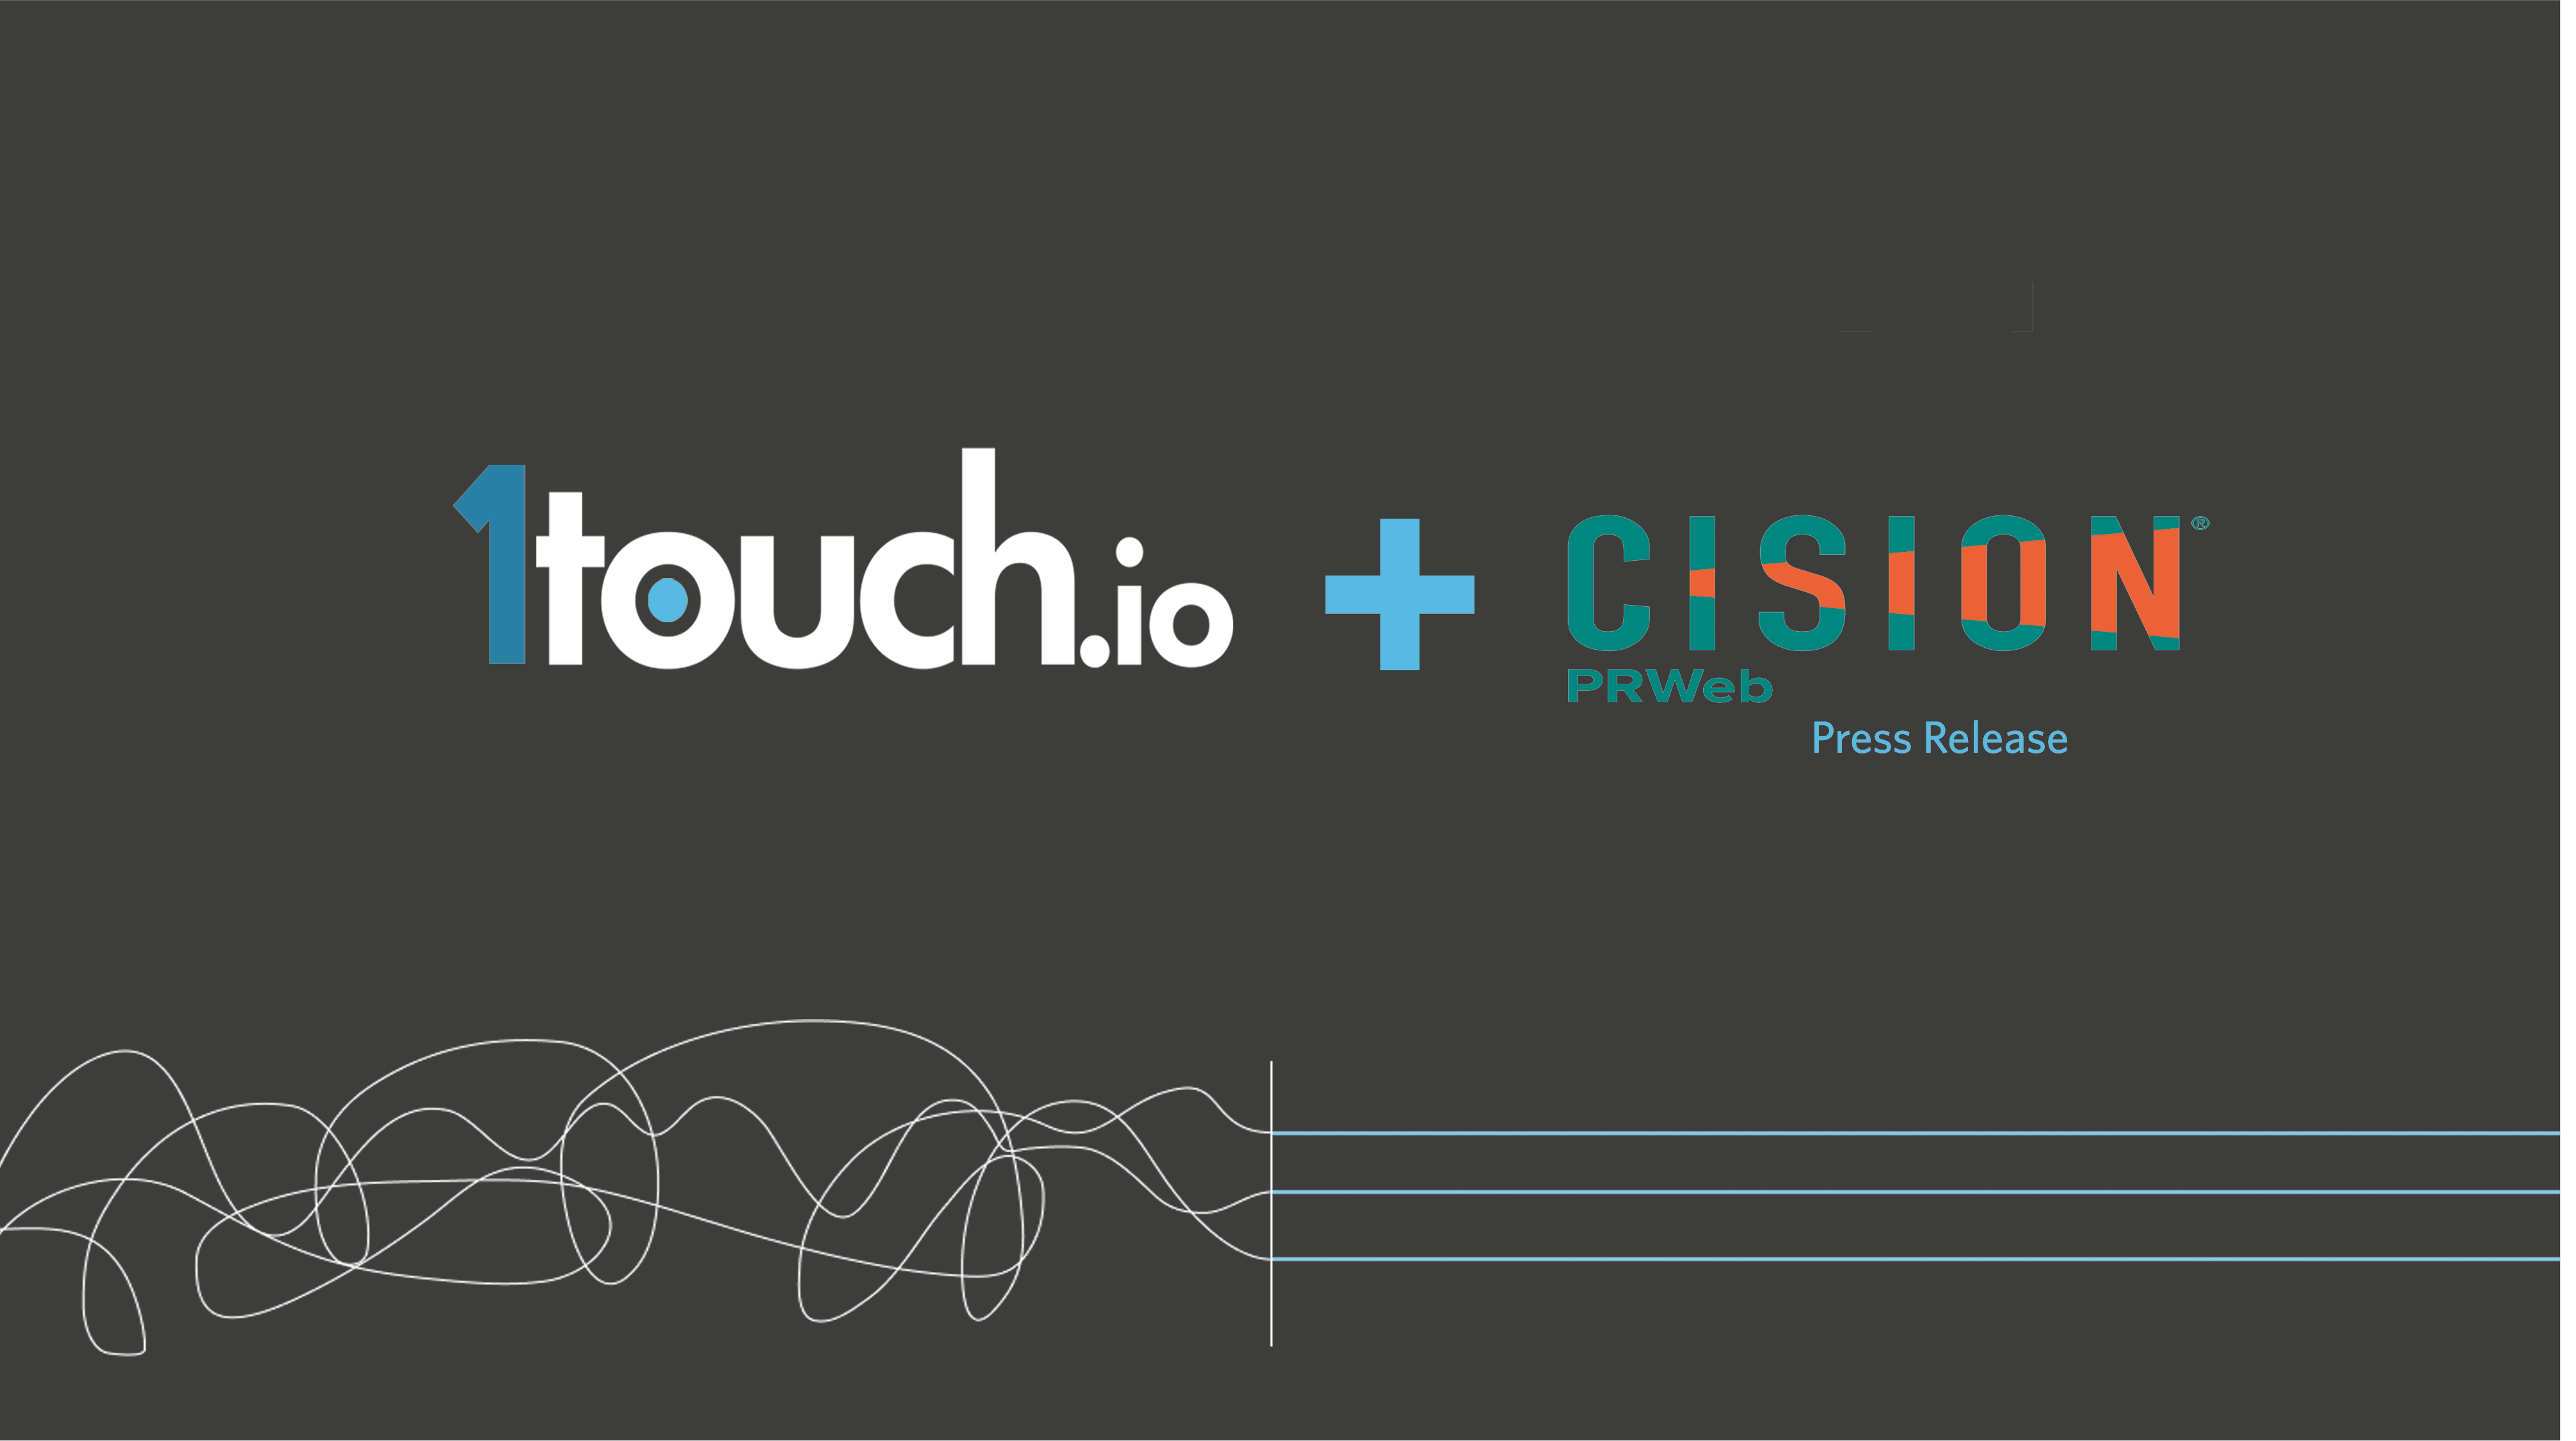 PRweb: 1touch.io Secures $14 Million Series A Round for its Network-Based Data Discovery, Privacy an